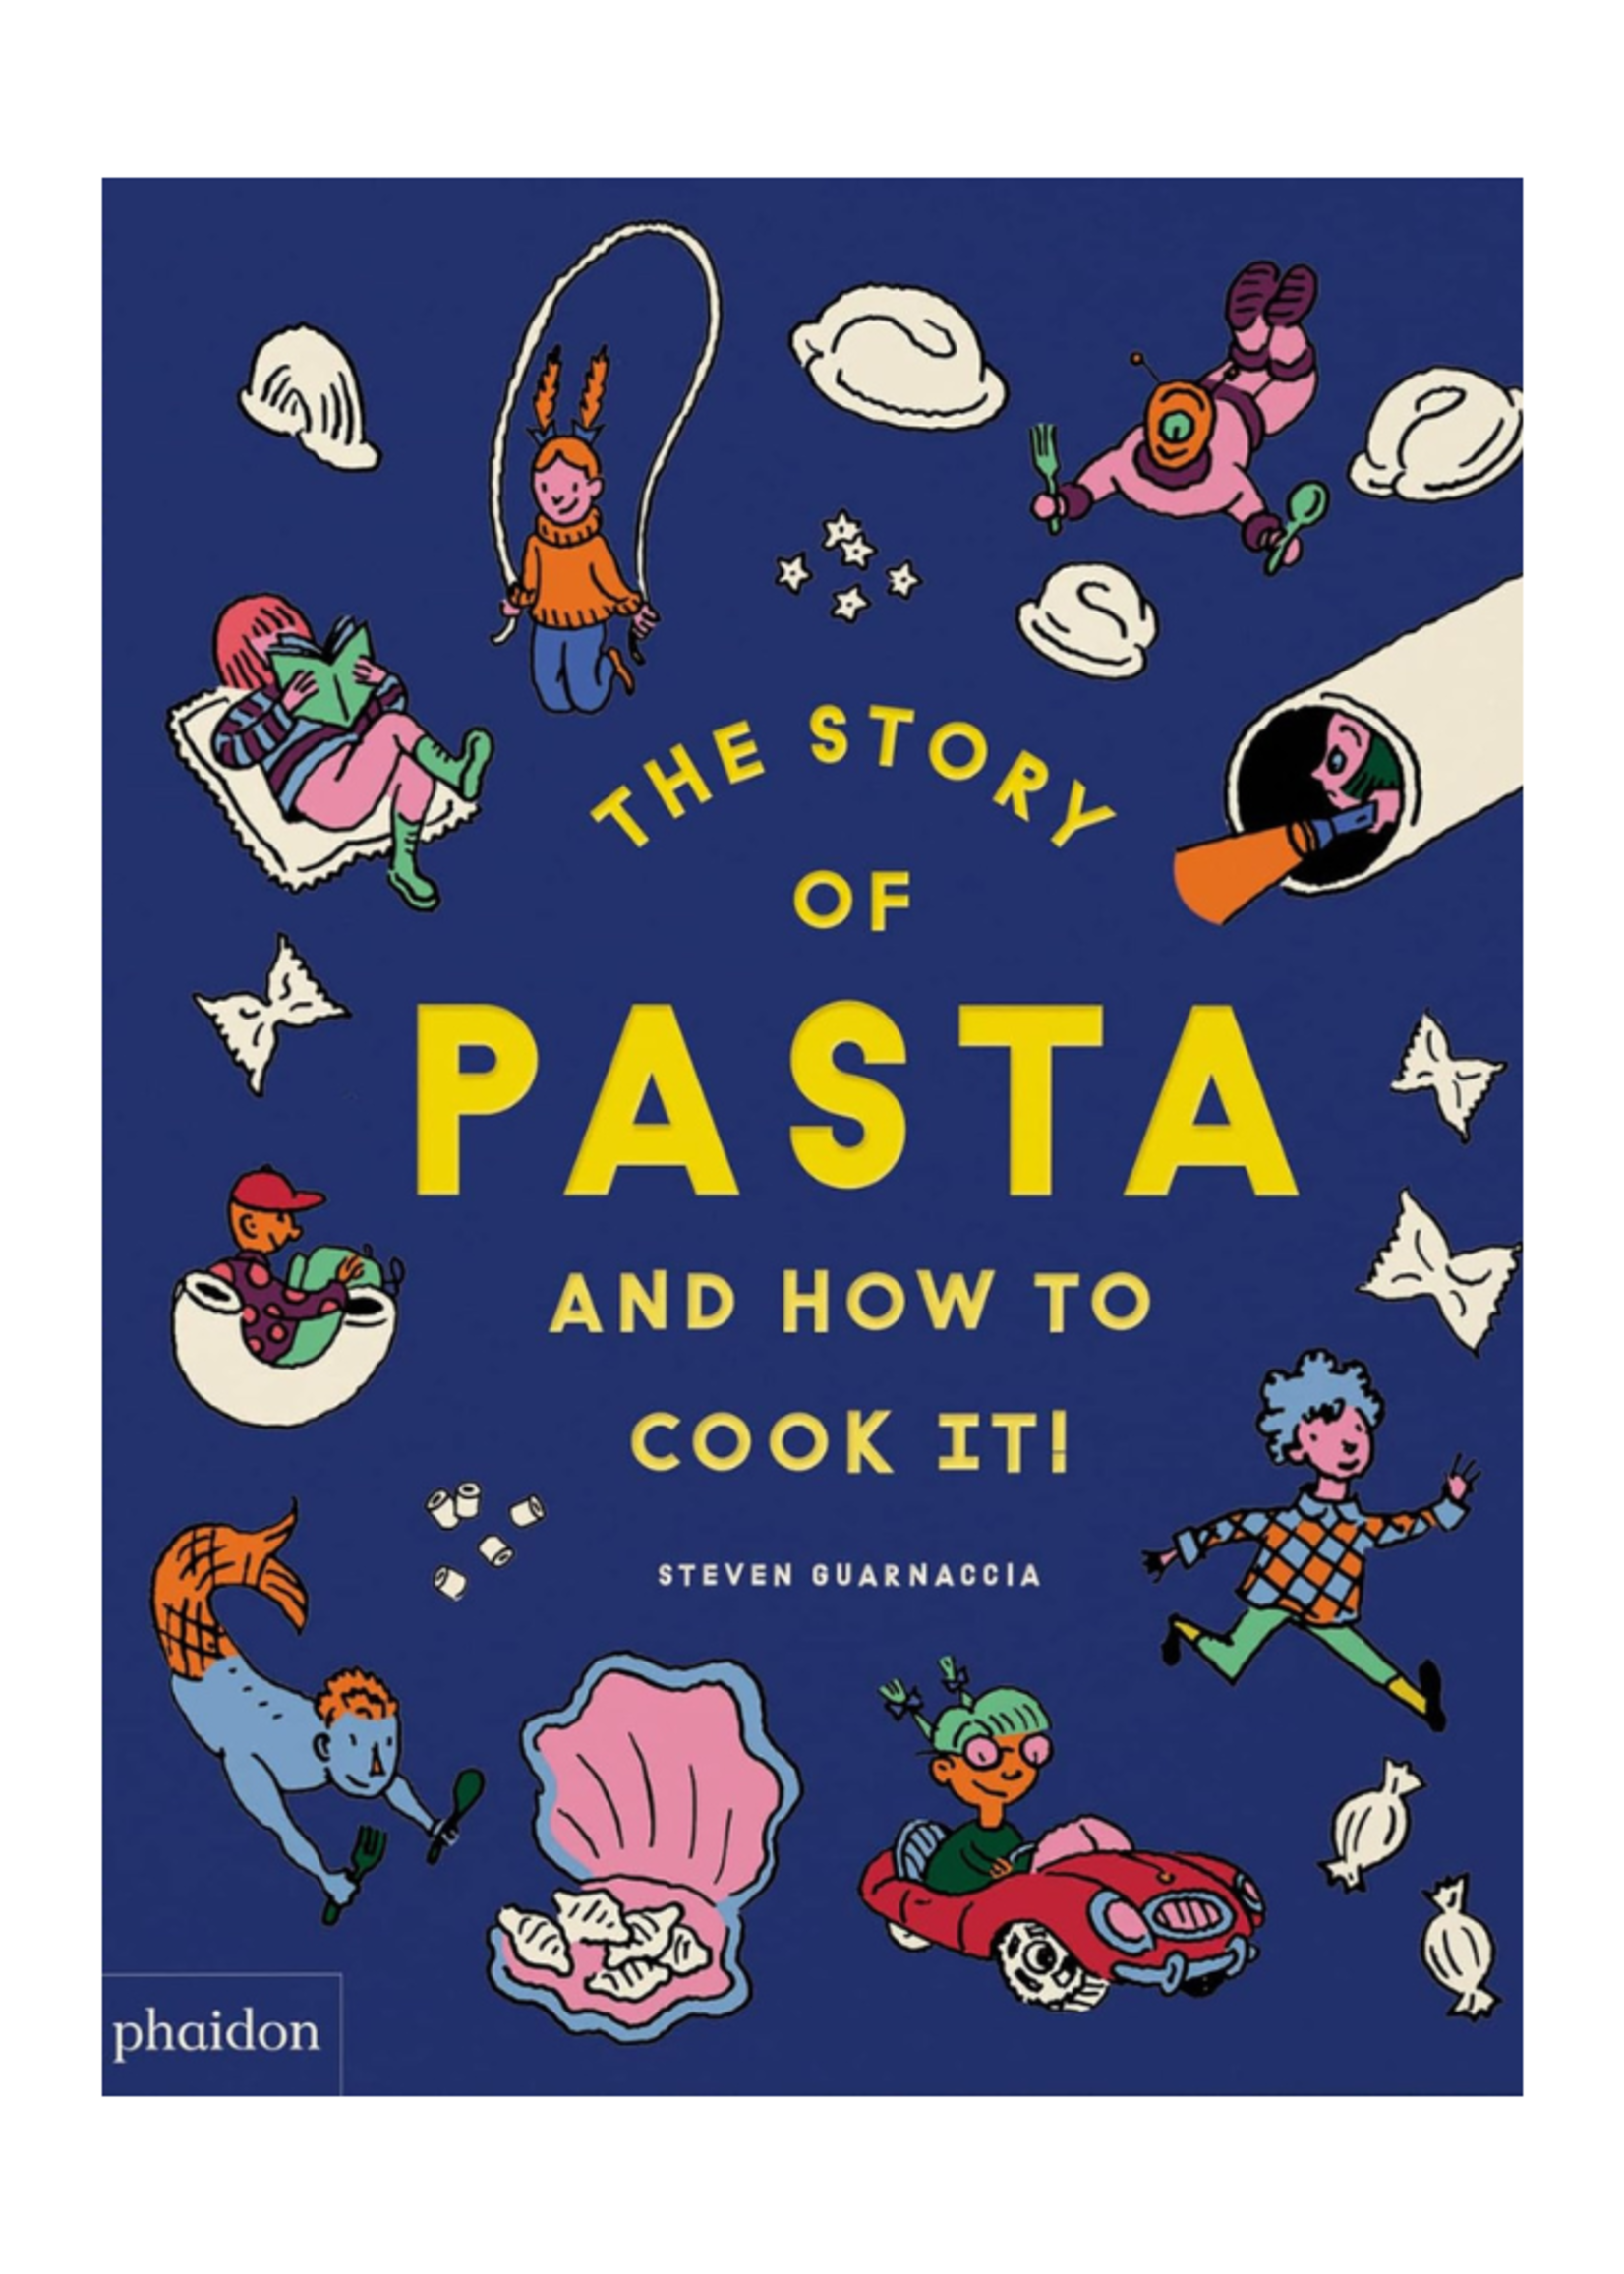 Phaidon Press The Story of Pasta and How to Cook it by Steven Guarnaccia with Heather Thomas